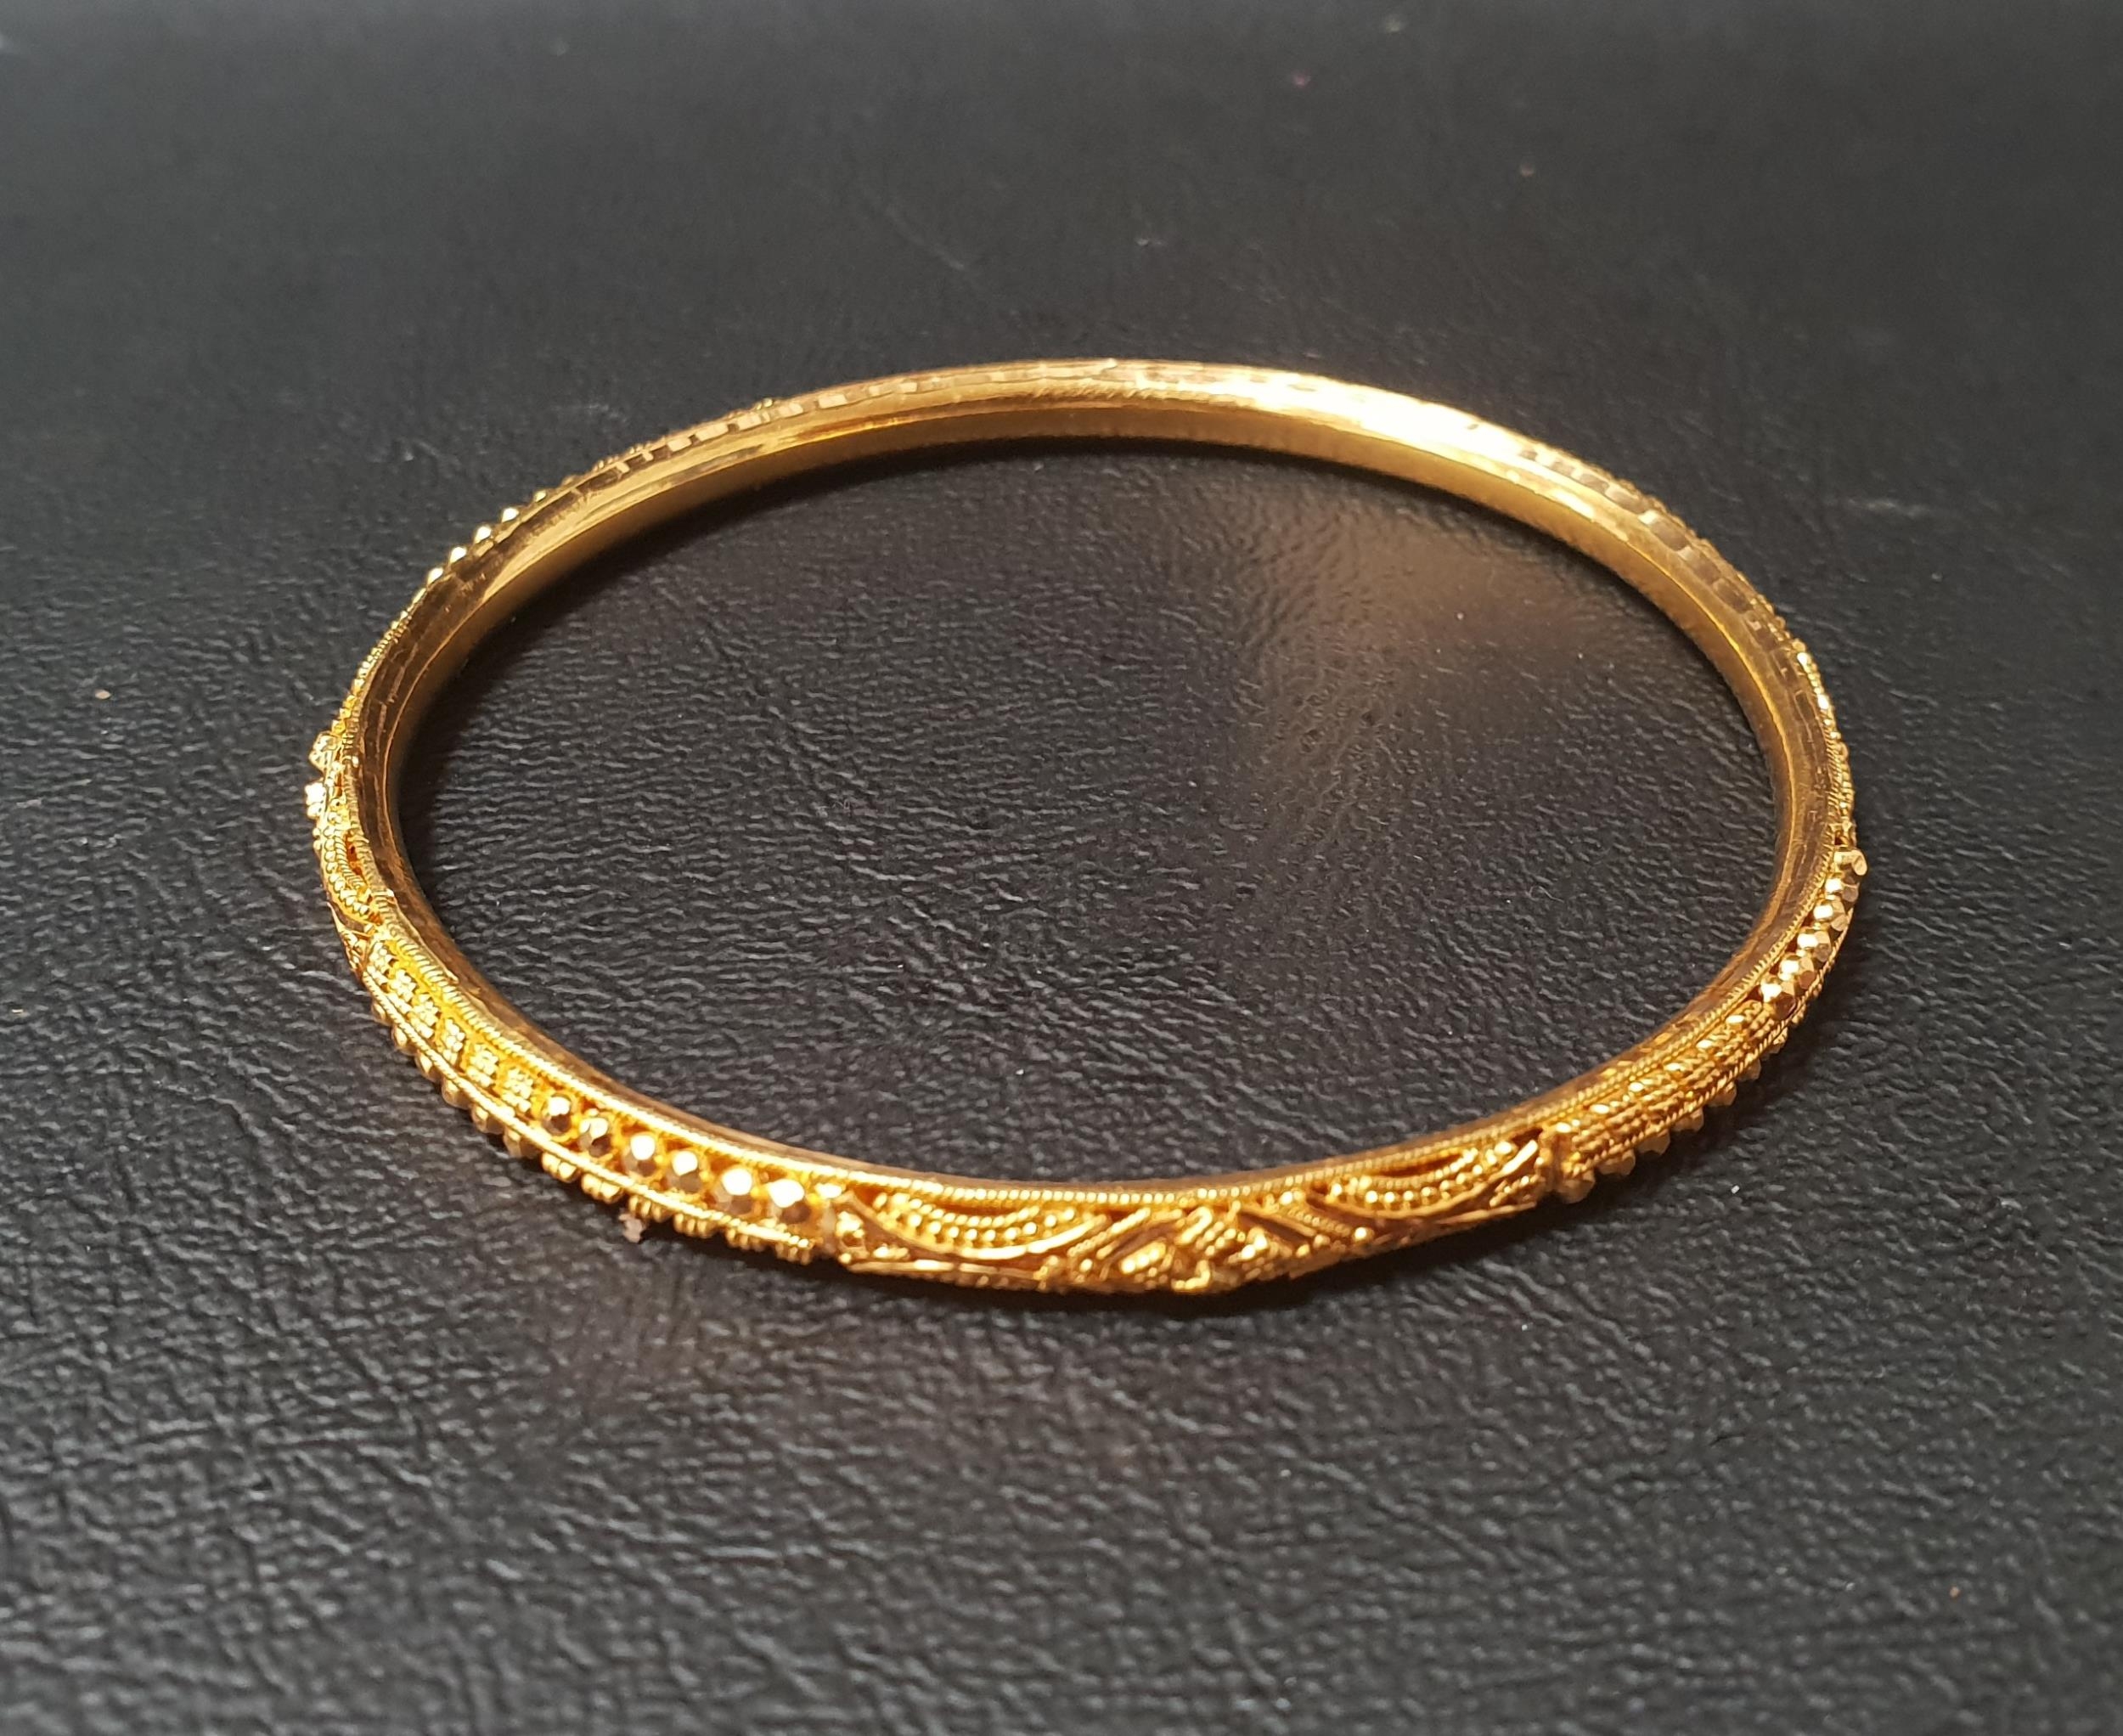 TWENTY-TWO CARAT GOLD BANGLE with relief detail, approximately 10 grams